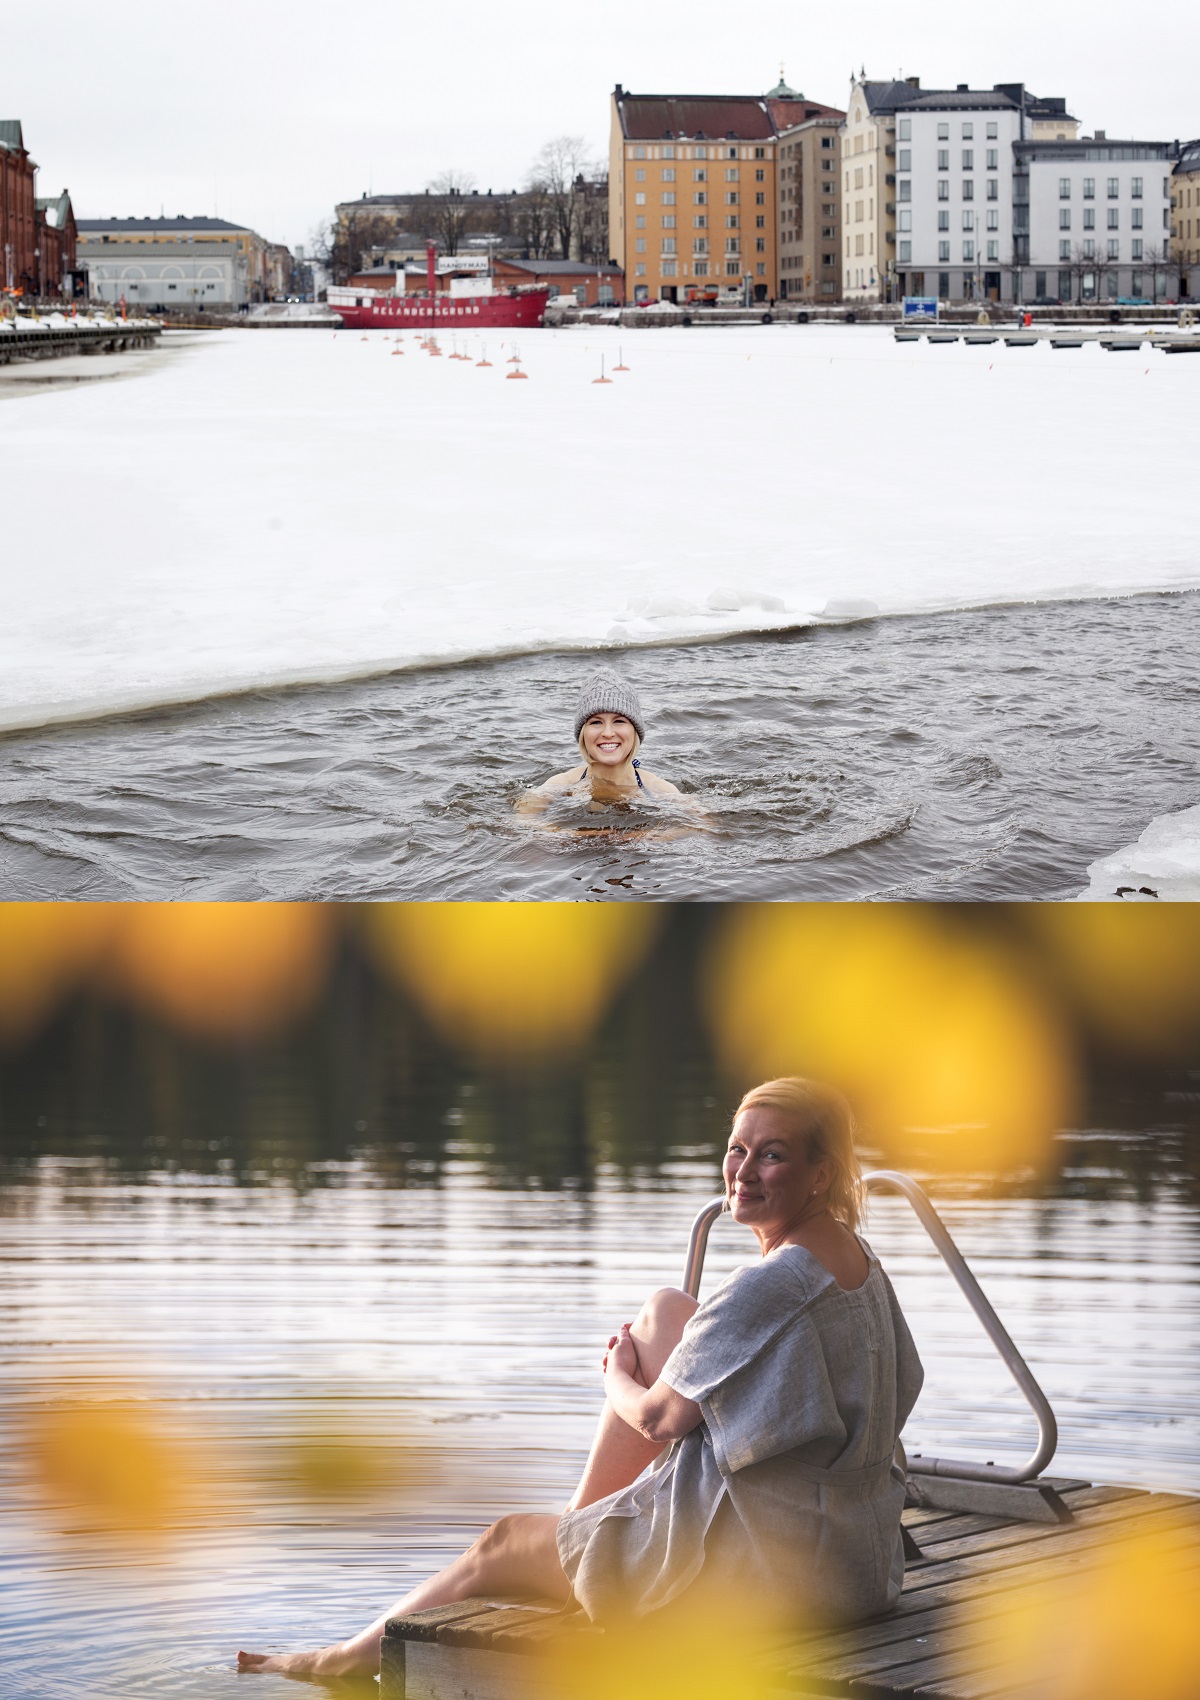 The Power of Hot and Cold. From Sauna to Sea: The Finnish Way to a Happy, Healthy Life